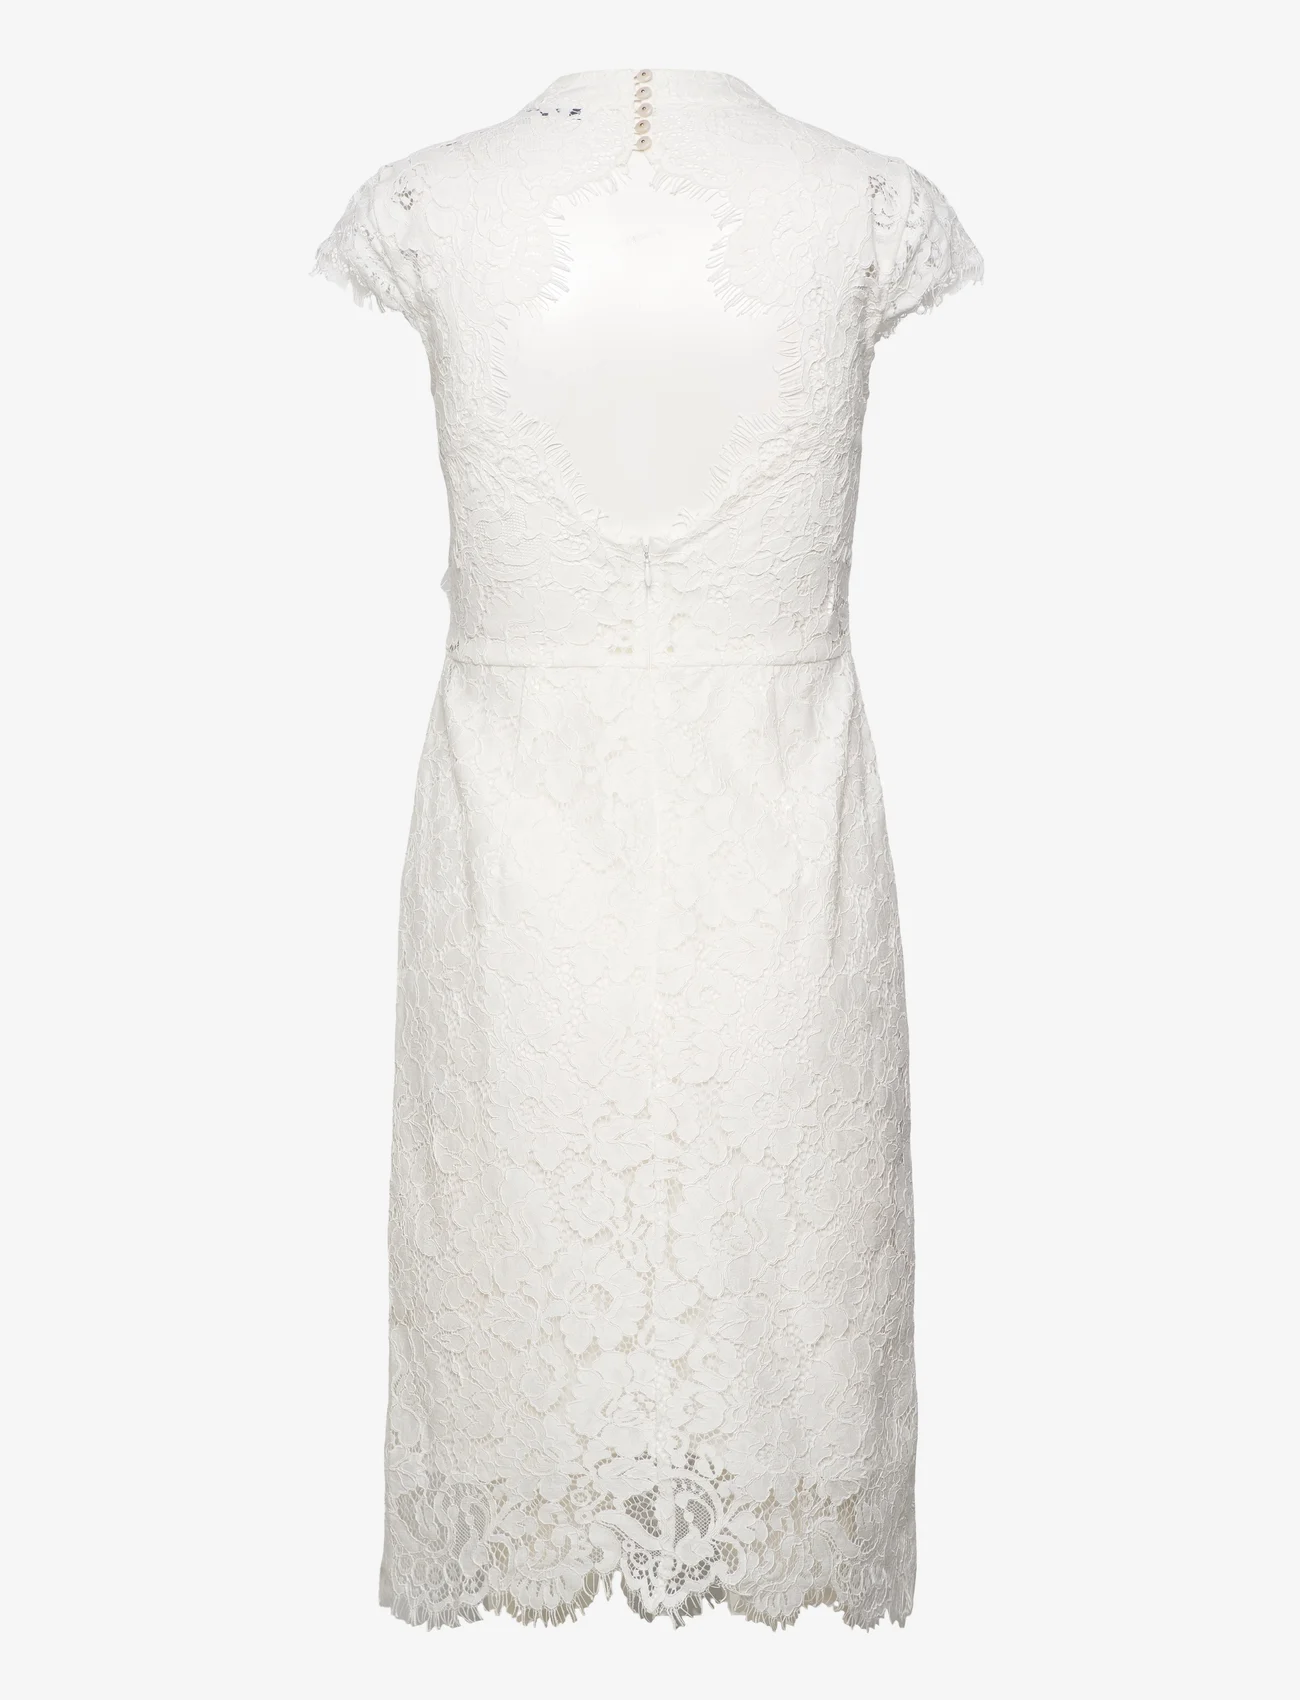 IVY OAK - Stand-Up Collar Lace Dress - snow white - 1